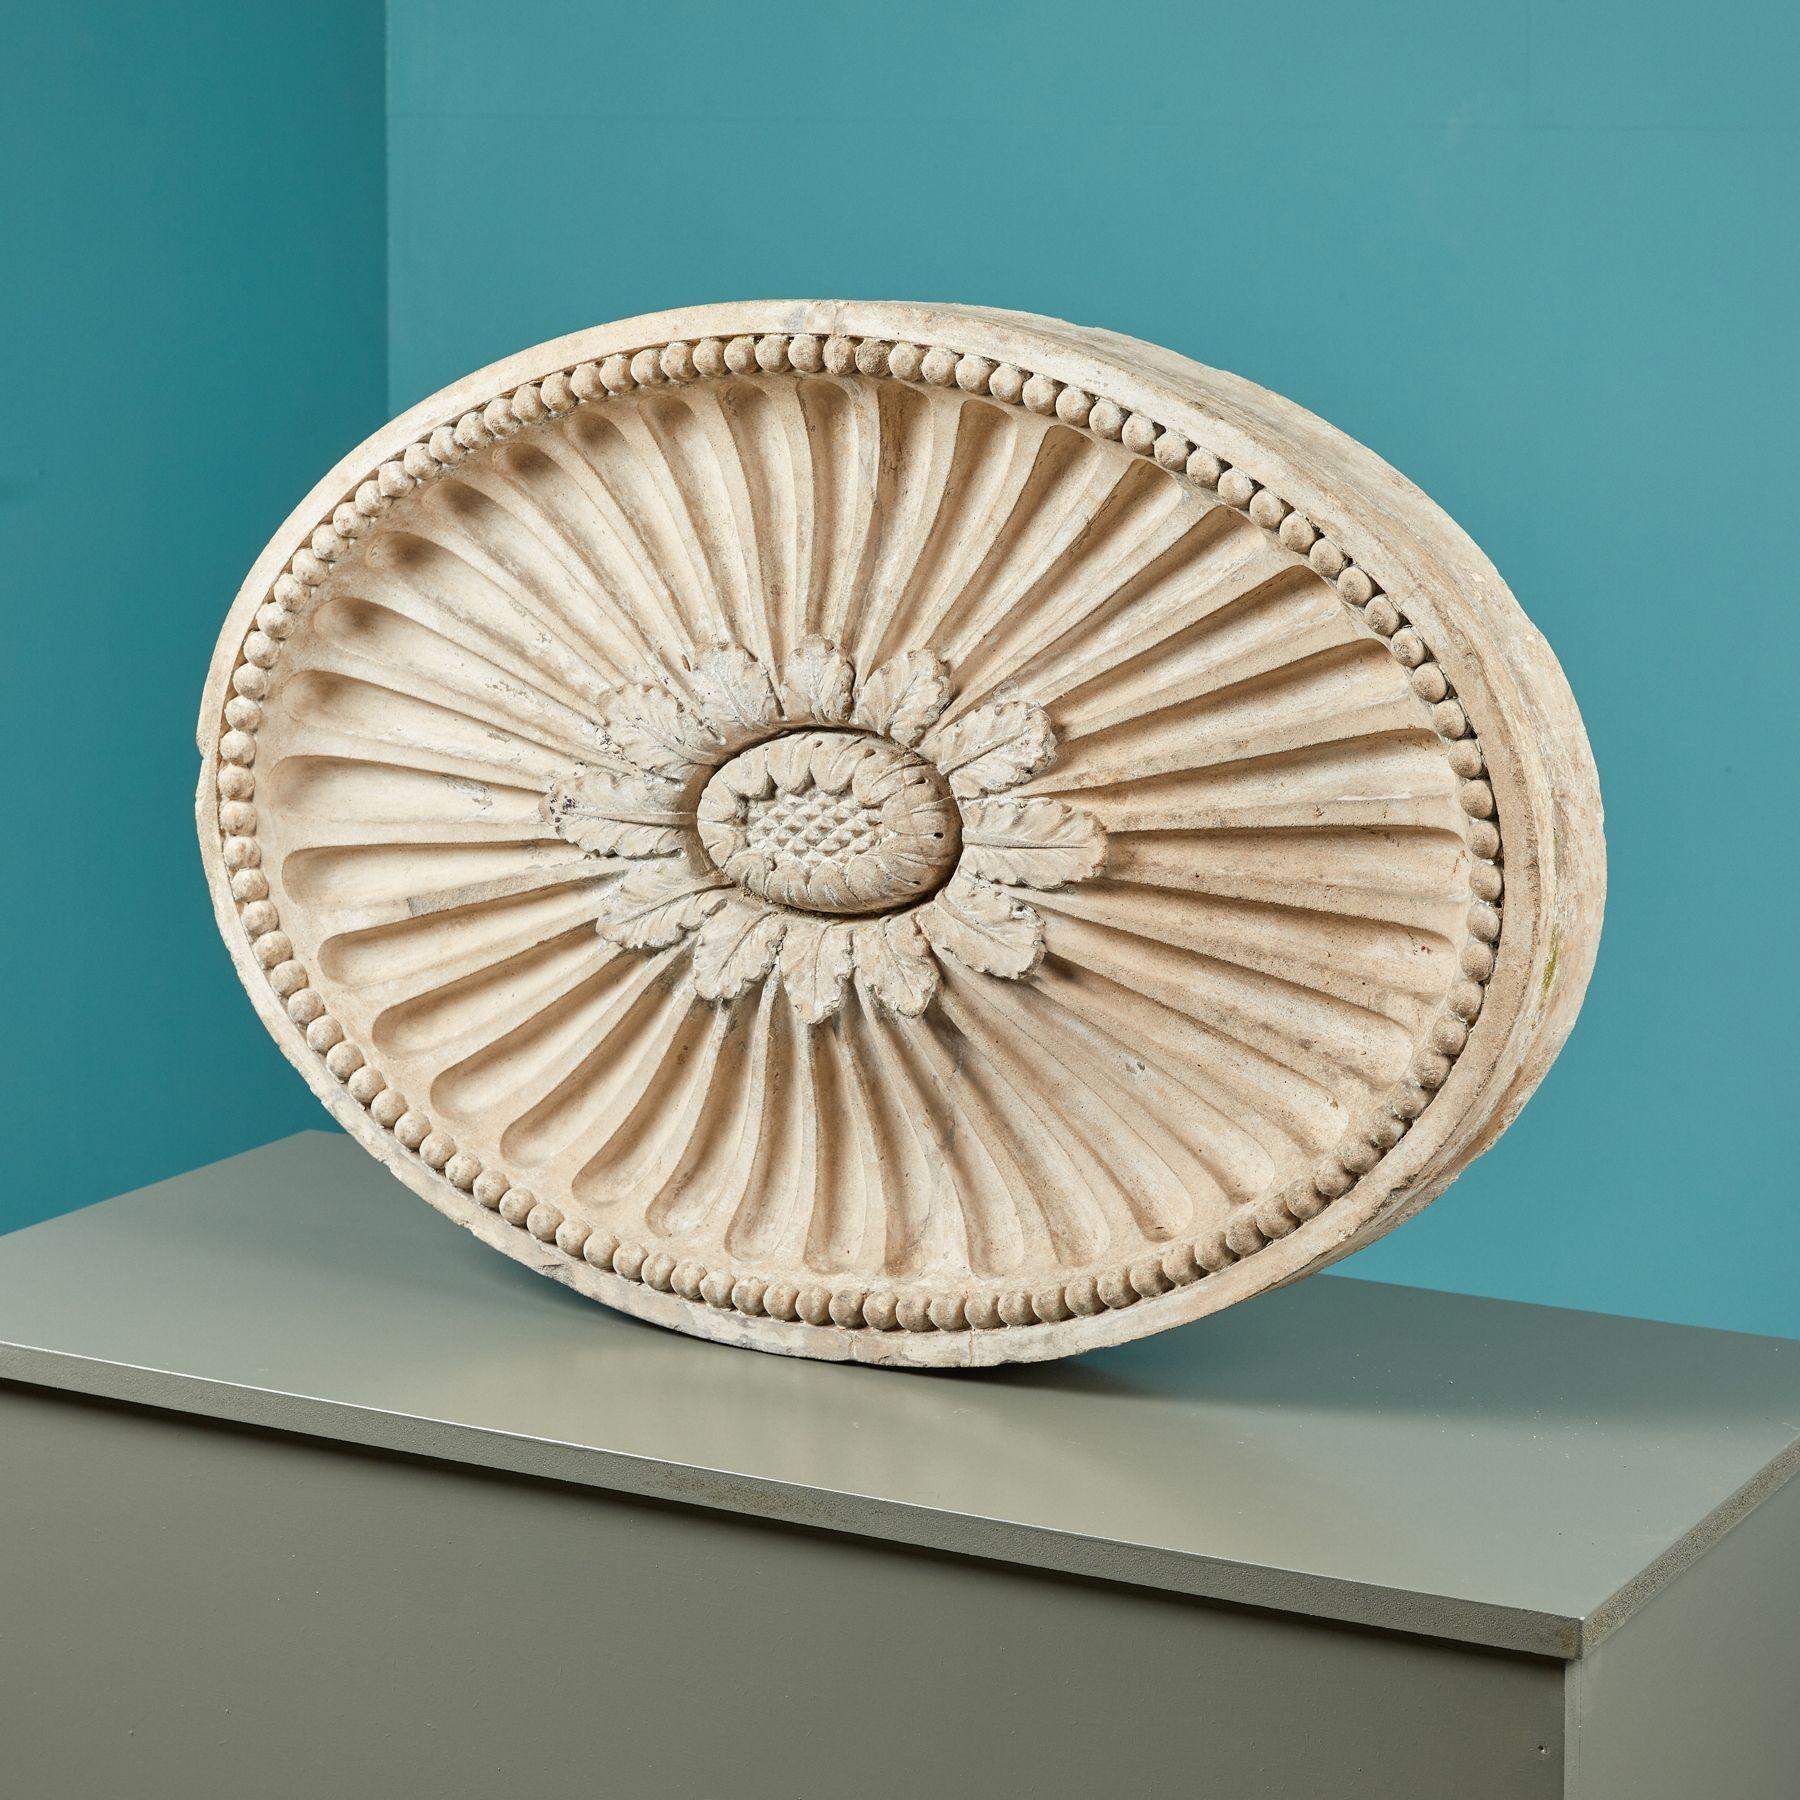 In classic architecture, a large patera (or paterae plural) like this would have once embellished a frieze or wall of a prominent building or house. This oval patera is a beautiful example of 18th century architecture, showcasing ornate details of